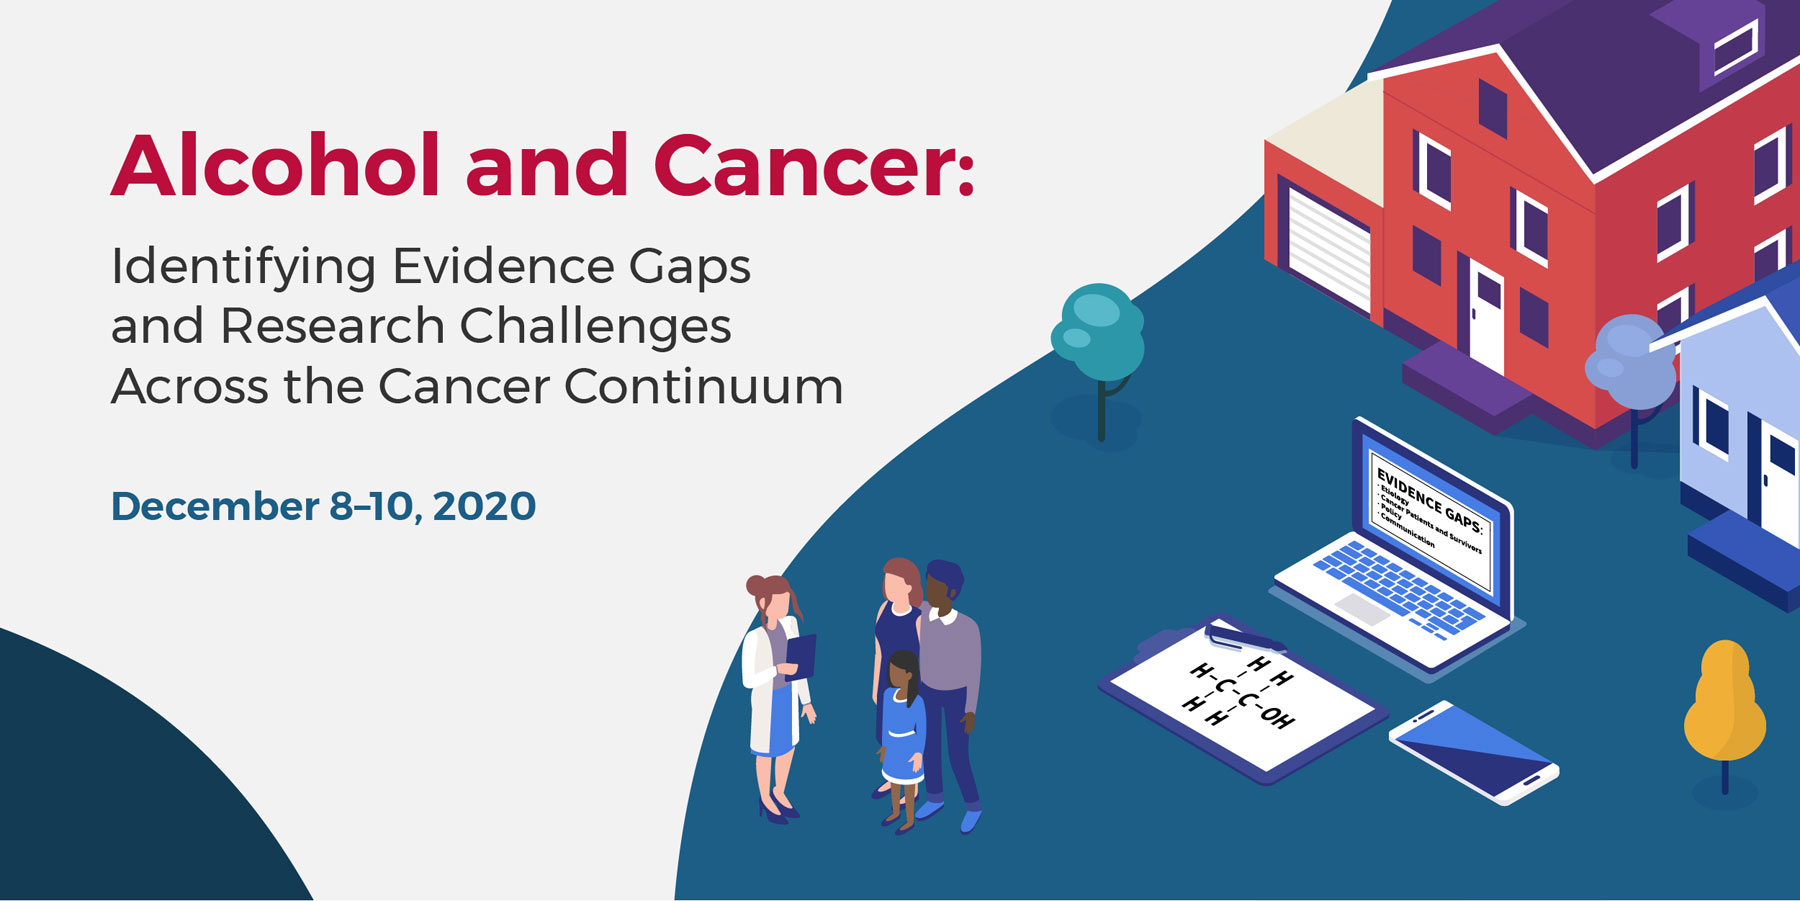 Alcohol and cancer: Identifying evidence gaps and research challenges across the cancer continuum